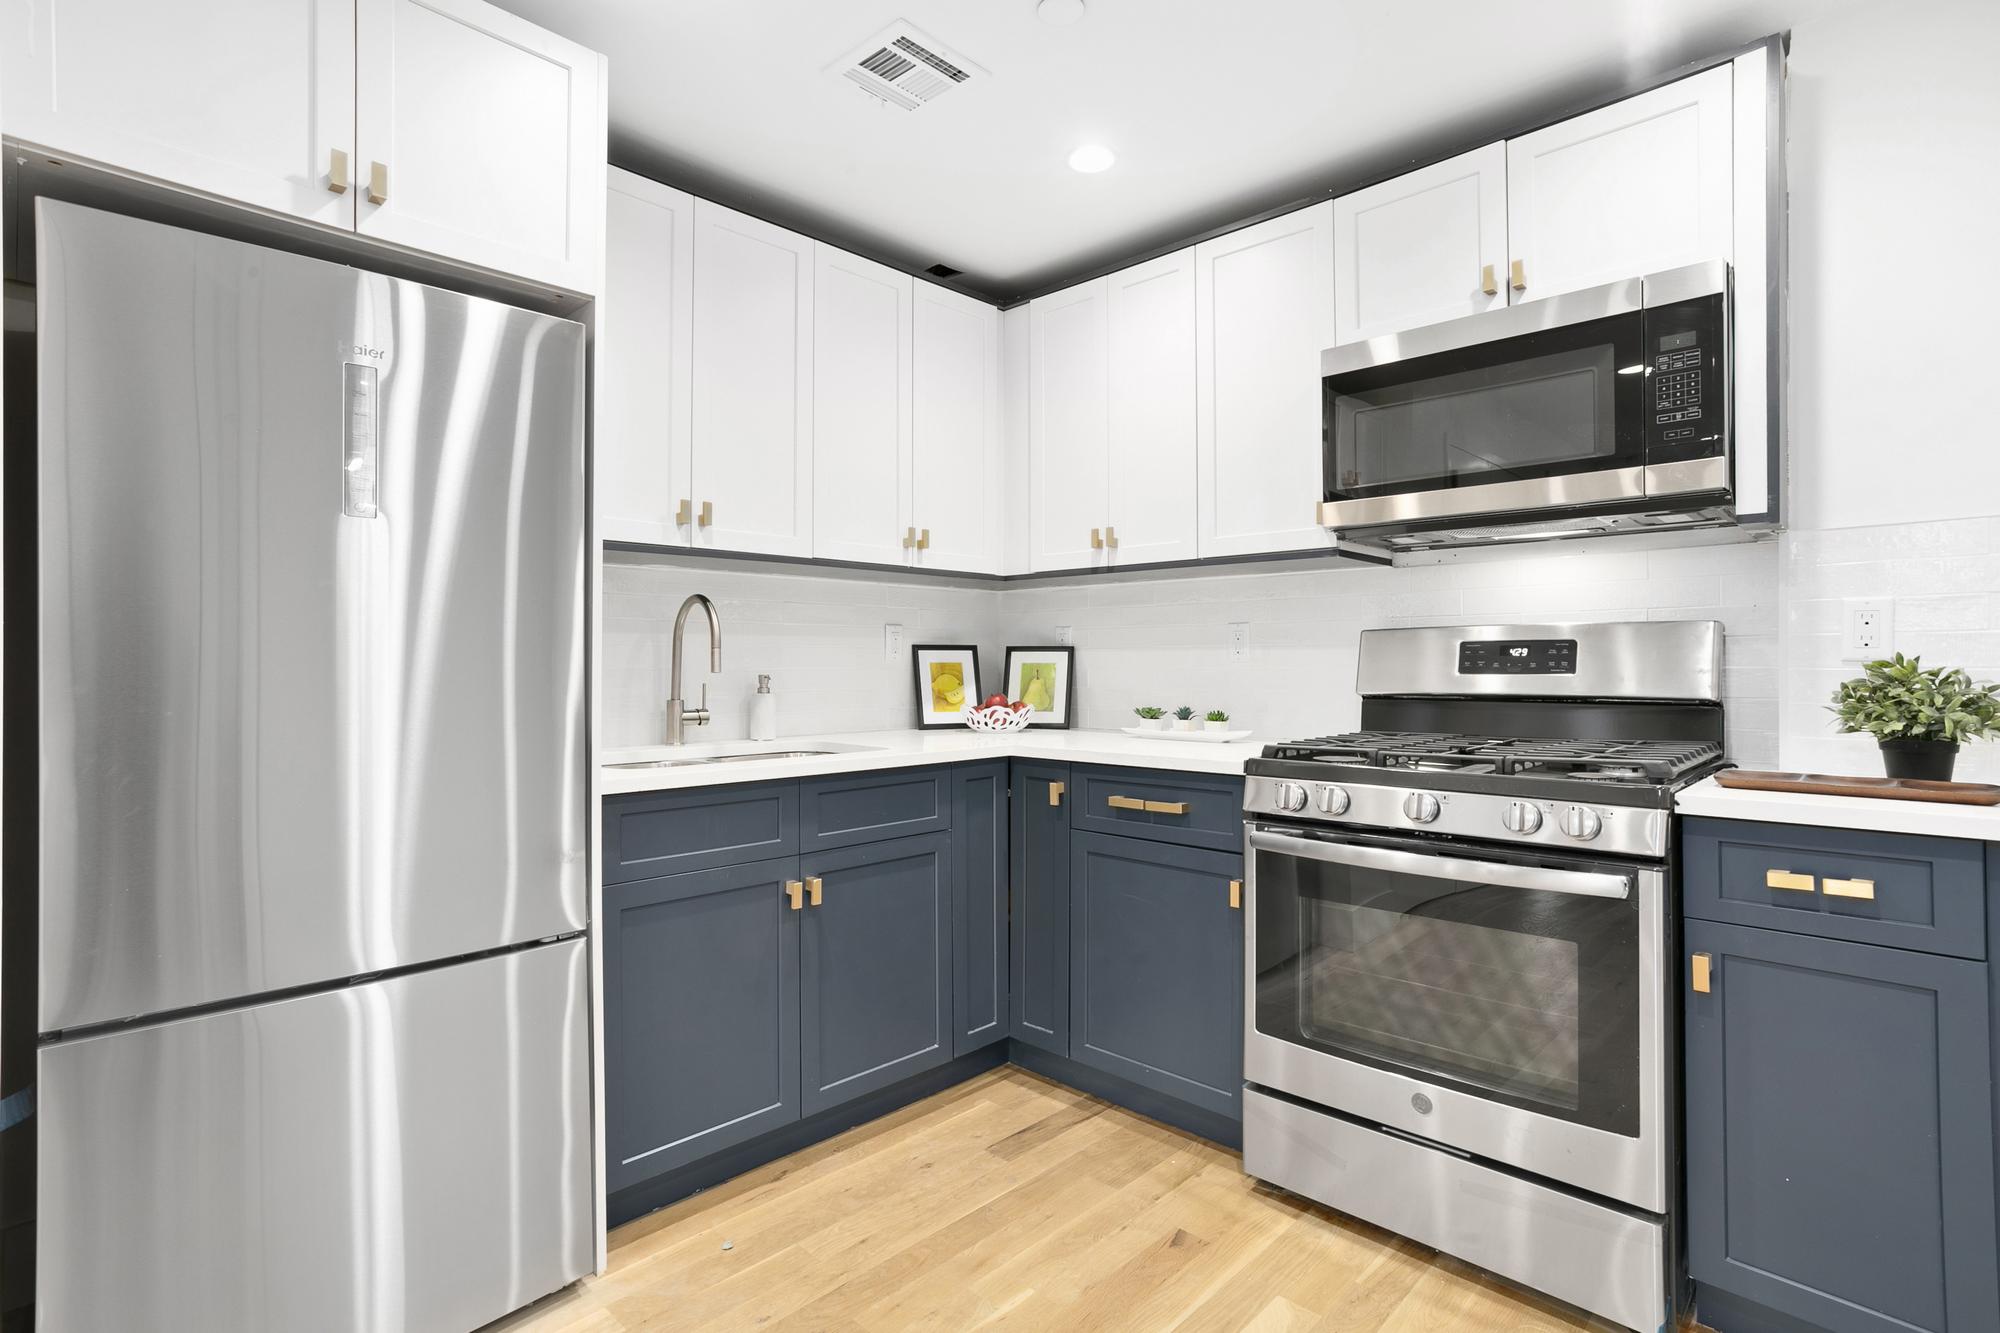 Modern Kitchen with White Top Cabinetry, Dark Slate Blue Lower Cabinetry with Wood Handles, Stainless Steel Fridge, Oven and Microwave, White Backsplash, Light Wood Flooring, Chrome Sink Faucet